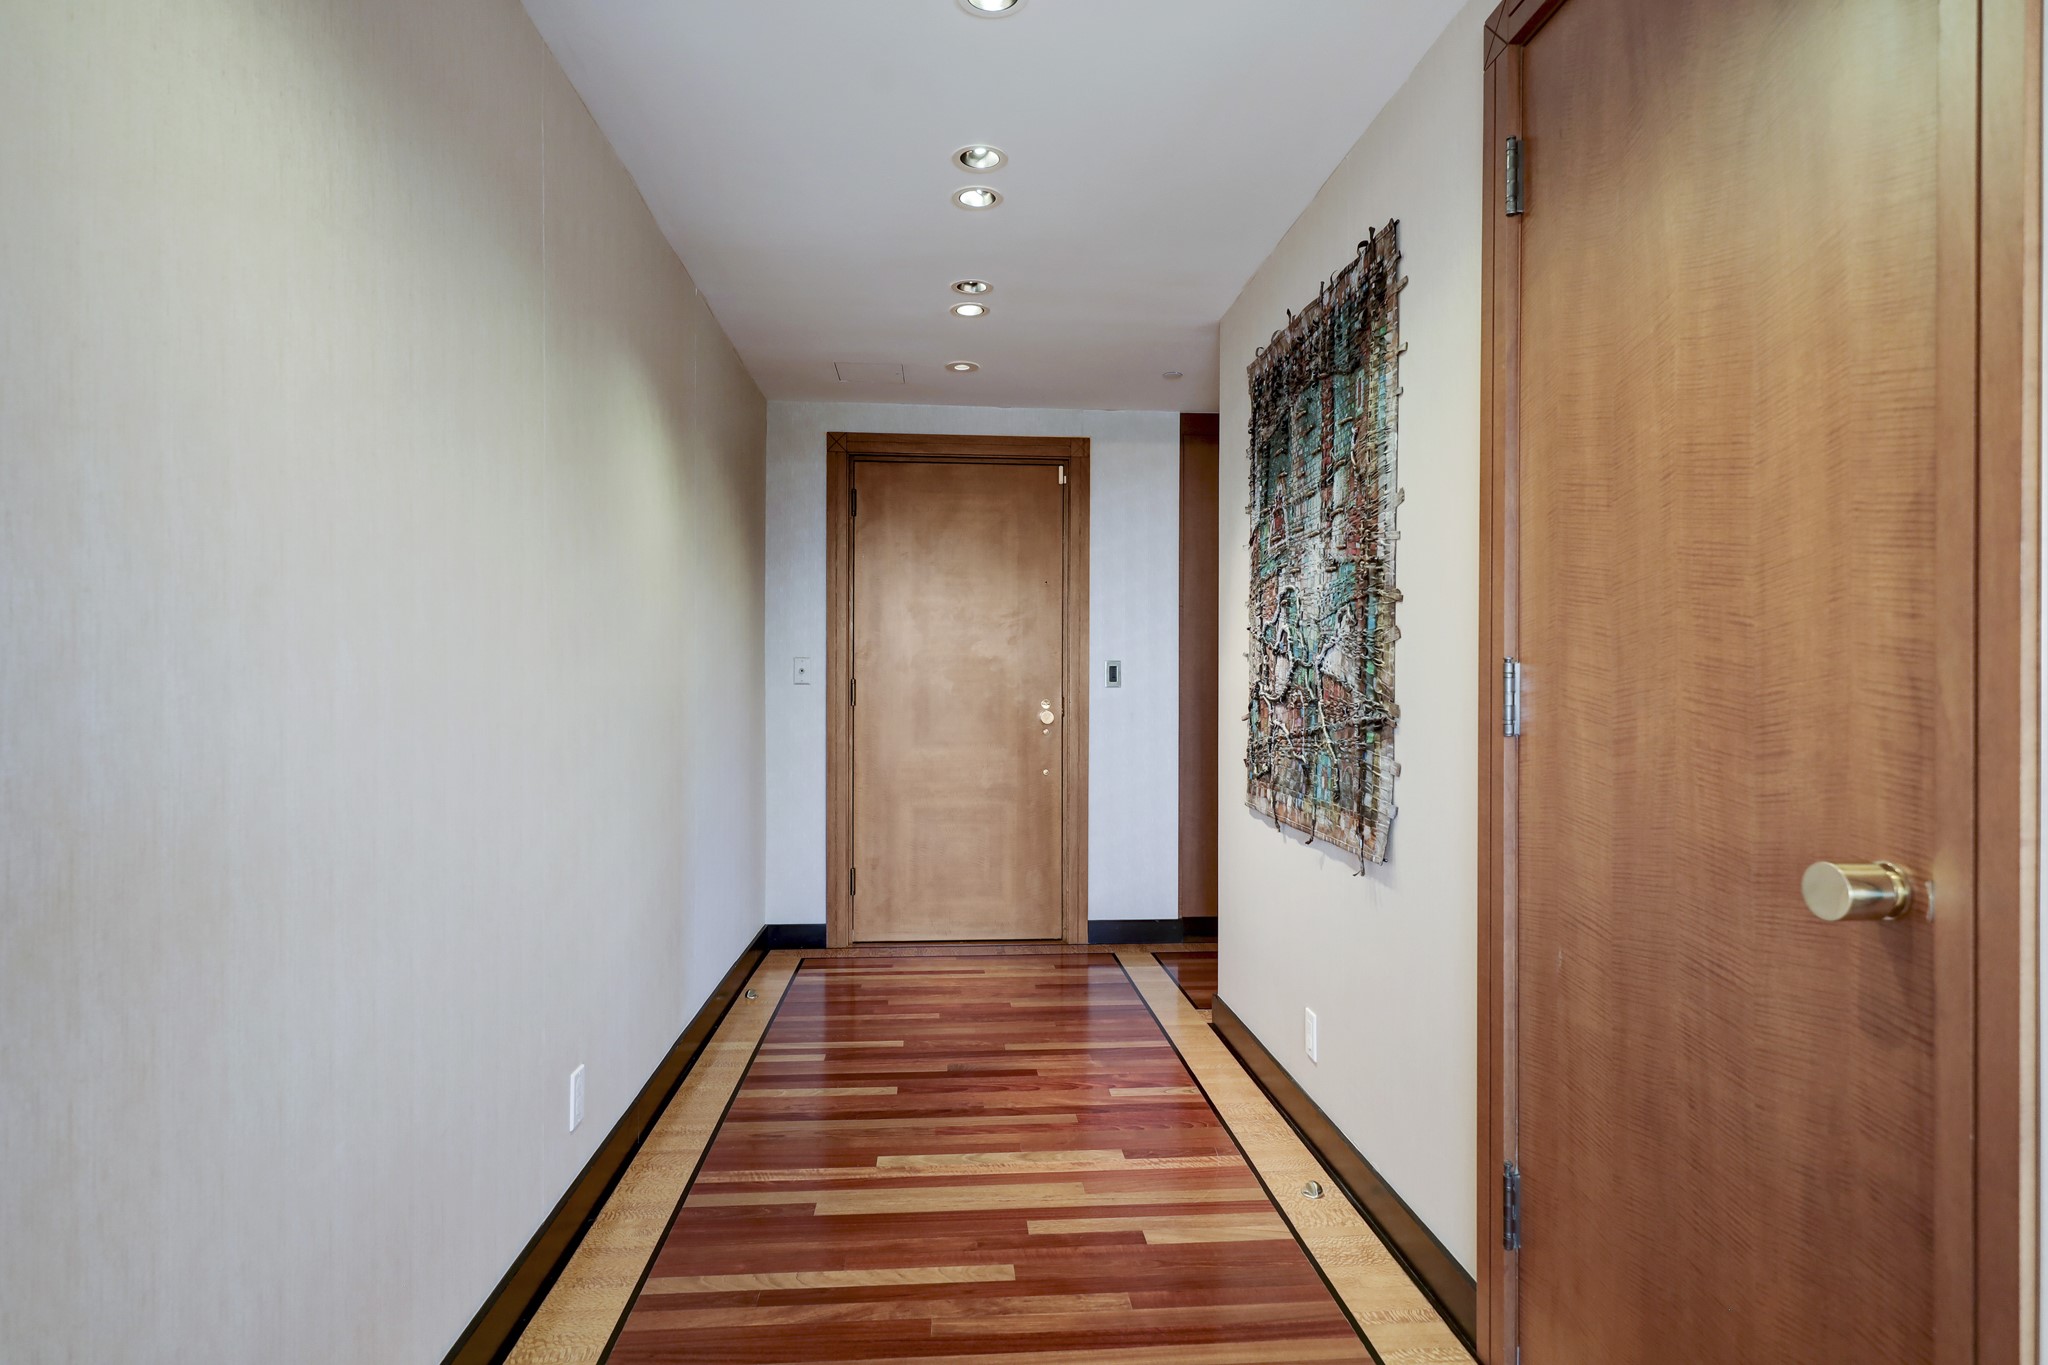 Entry has gleaming cherry hardwood floors.  Note the excellent wood craftsmanship in the inlaid design in the front door.